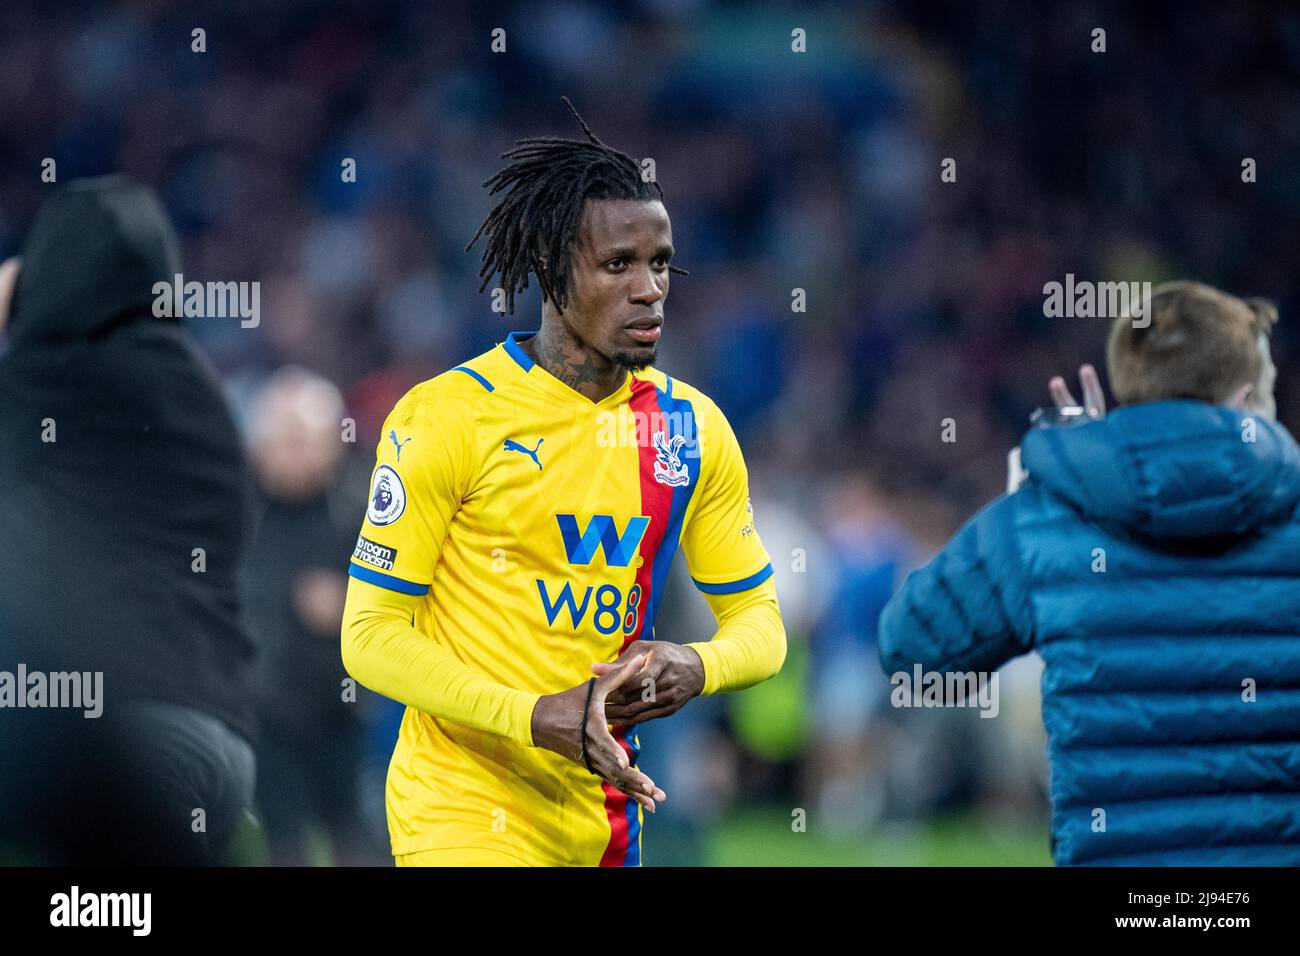 LIVERPOOL, ENGLAND - MAY 19: Wilfried Zaha of Crystal Palace during the Premier League match between Everton and Crystal Palace at Goodison Park on May 19, 2022 in Liverpool, United Kingdom. (Photo by Sebastian Frej) Stock Photo